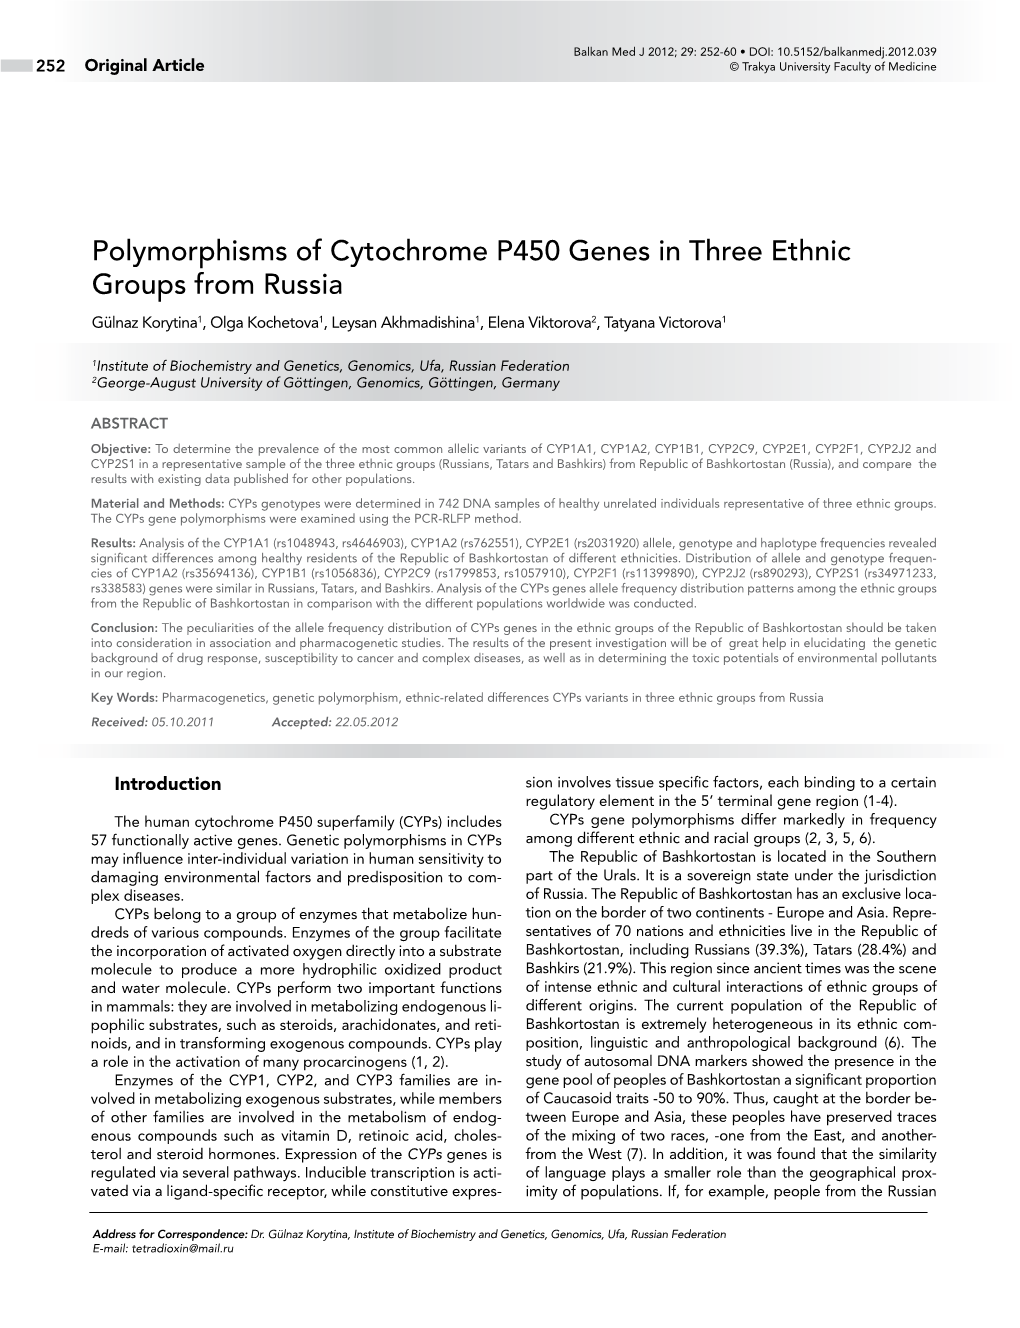 Polymorphisms of Cytochrome P450 Genes in Three Ethnic Groups From